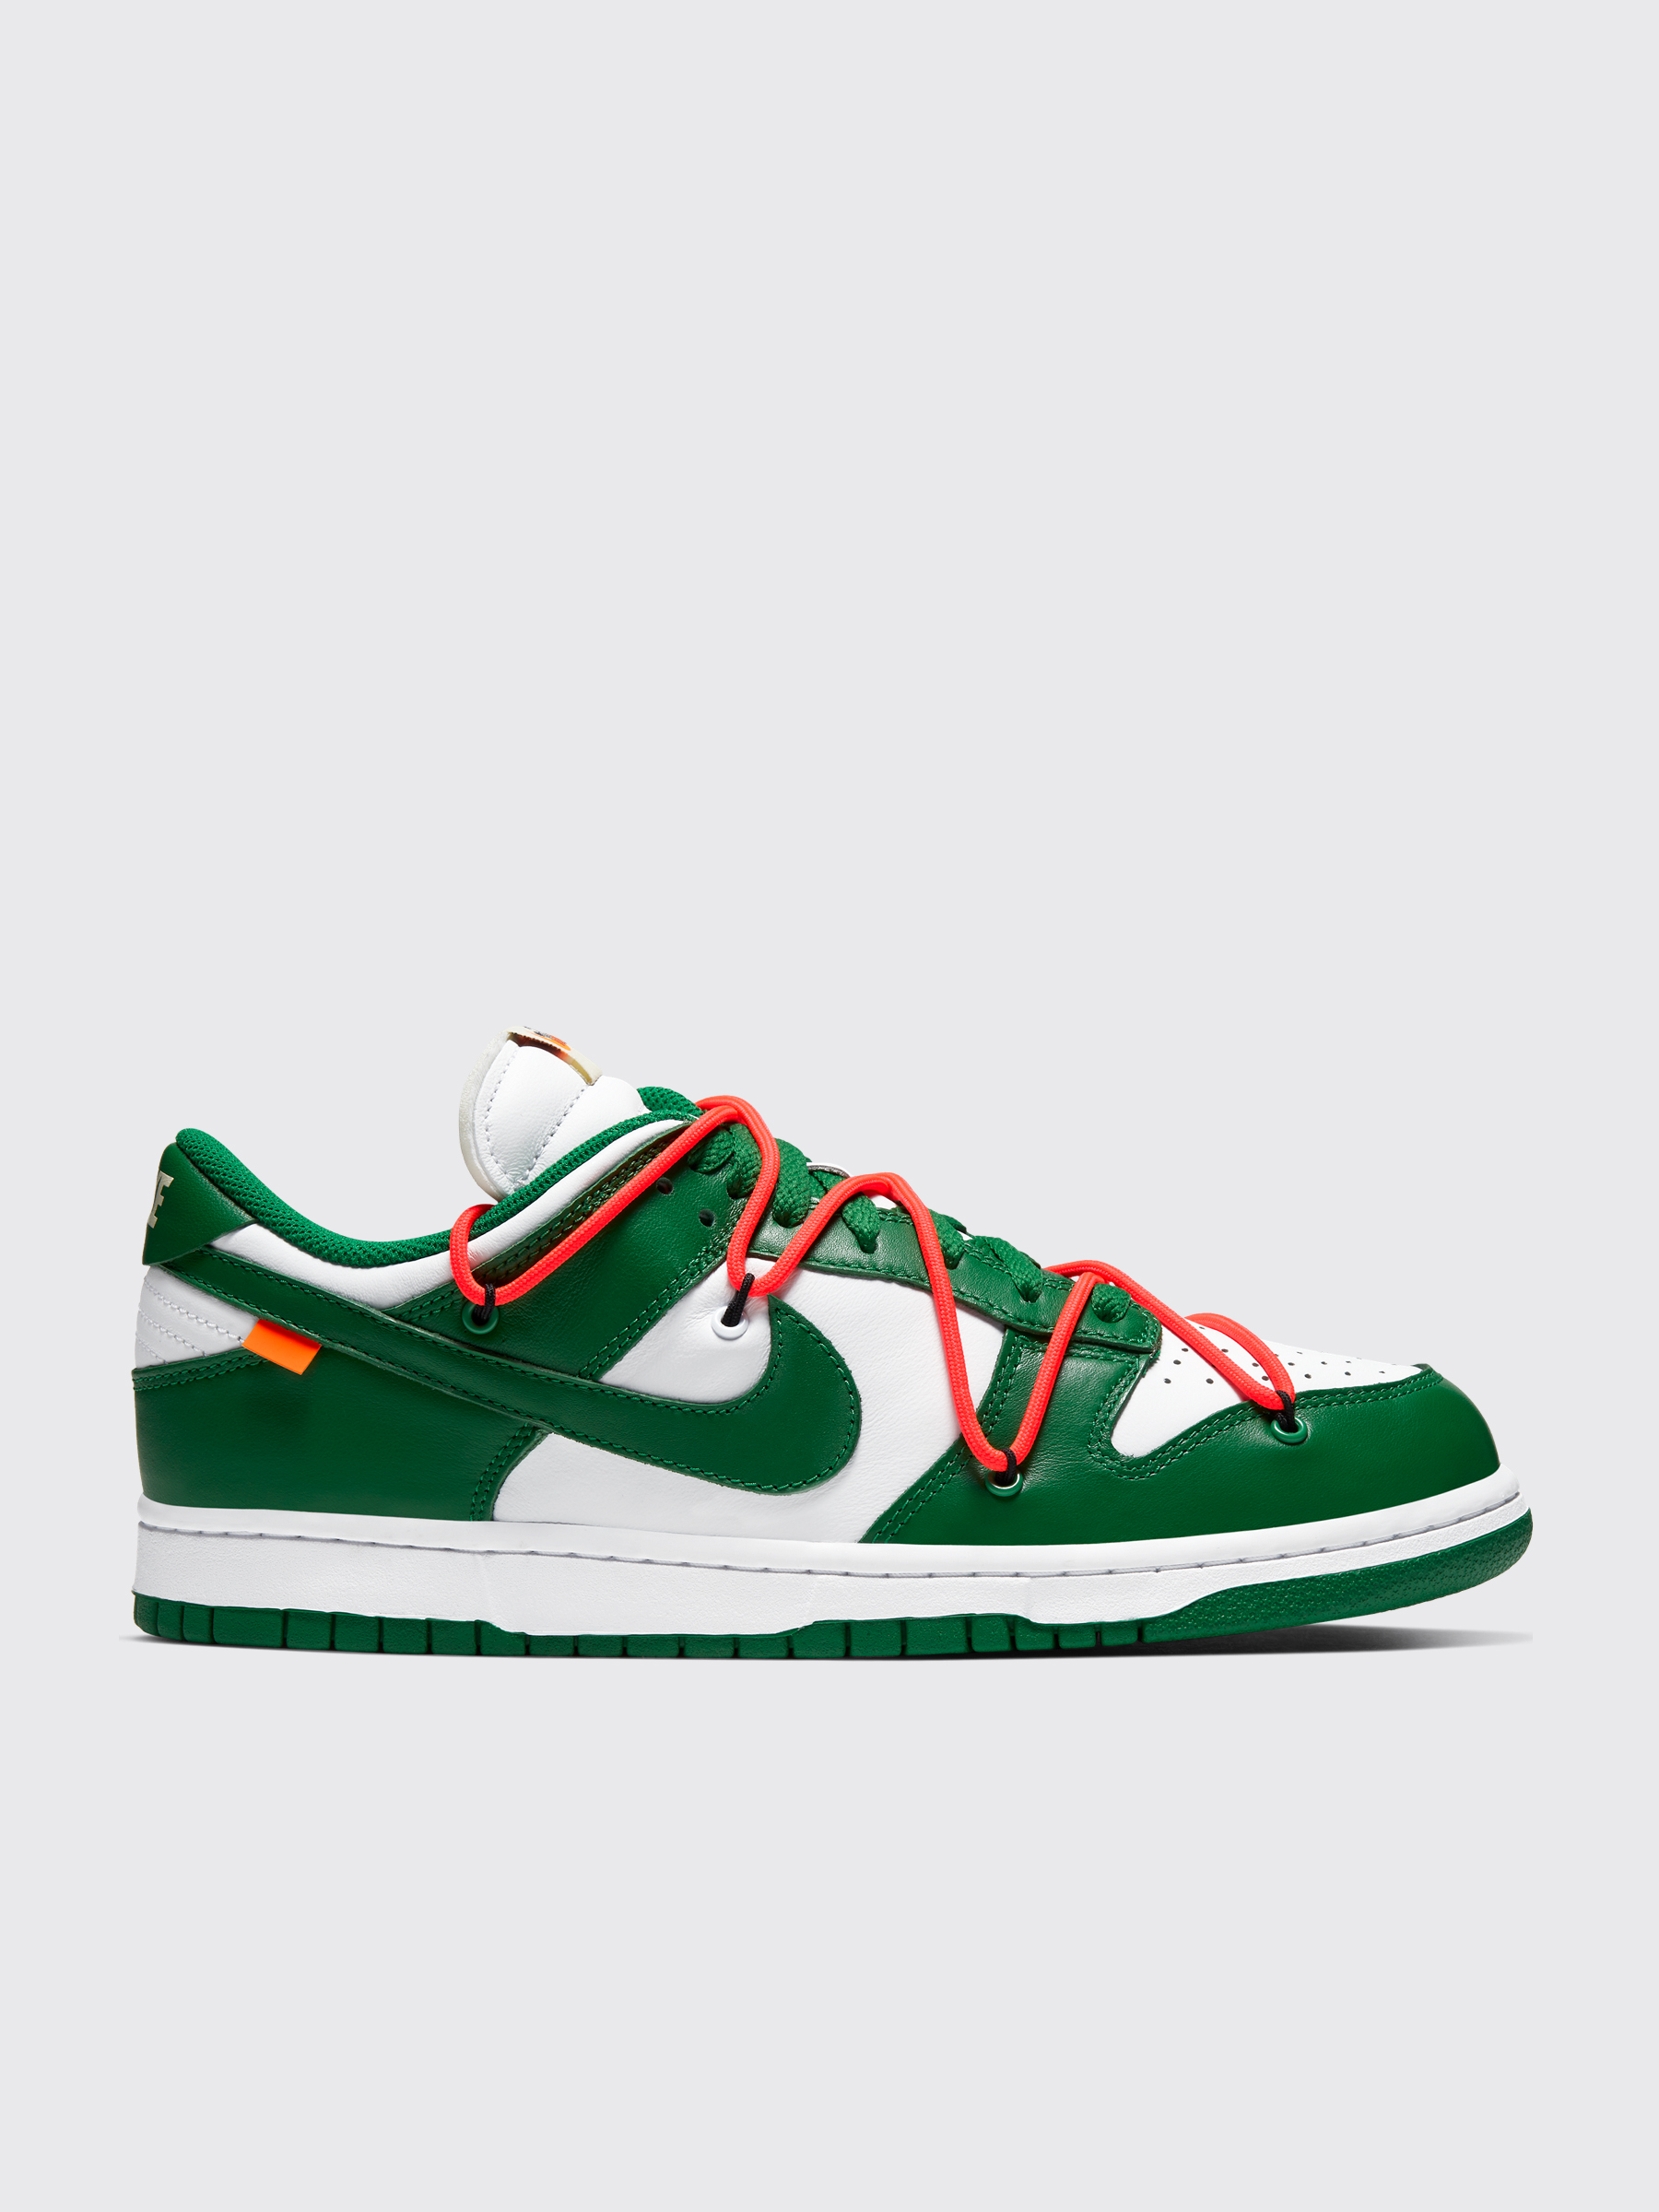 nike x off white dunk low resale